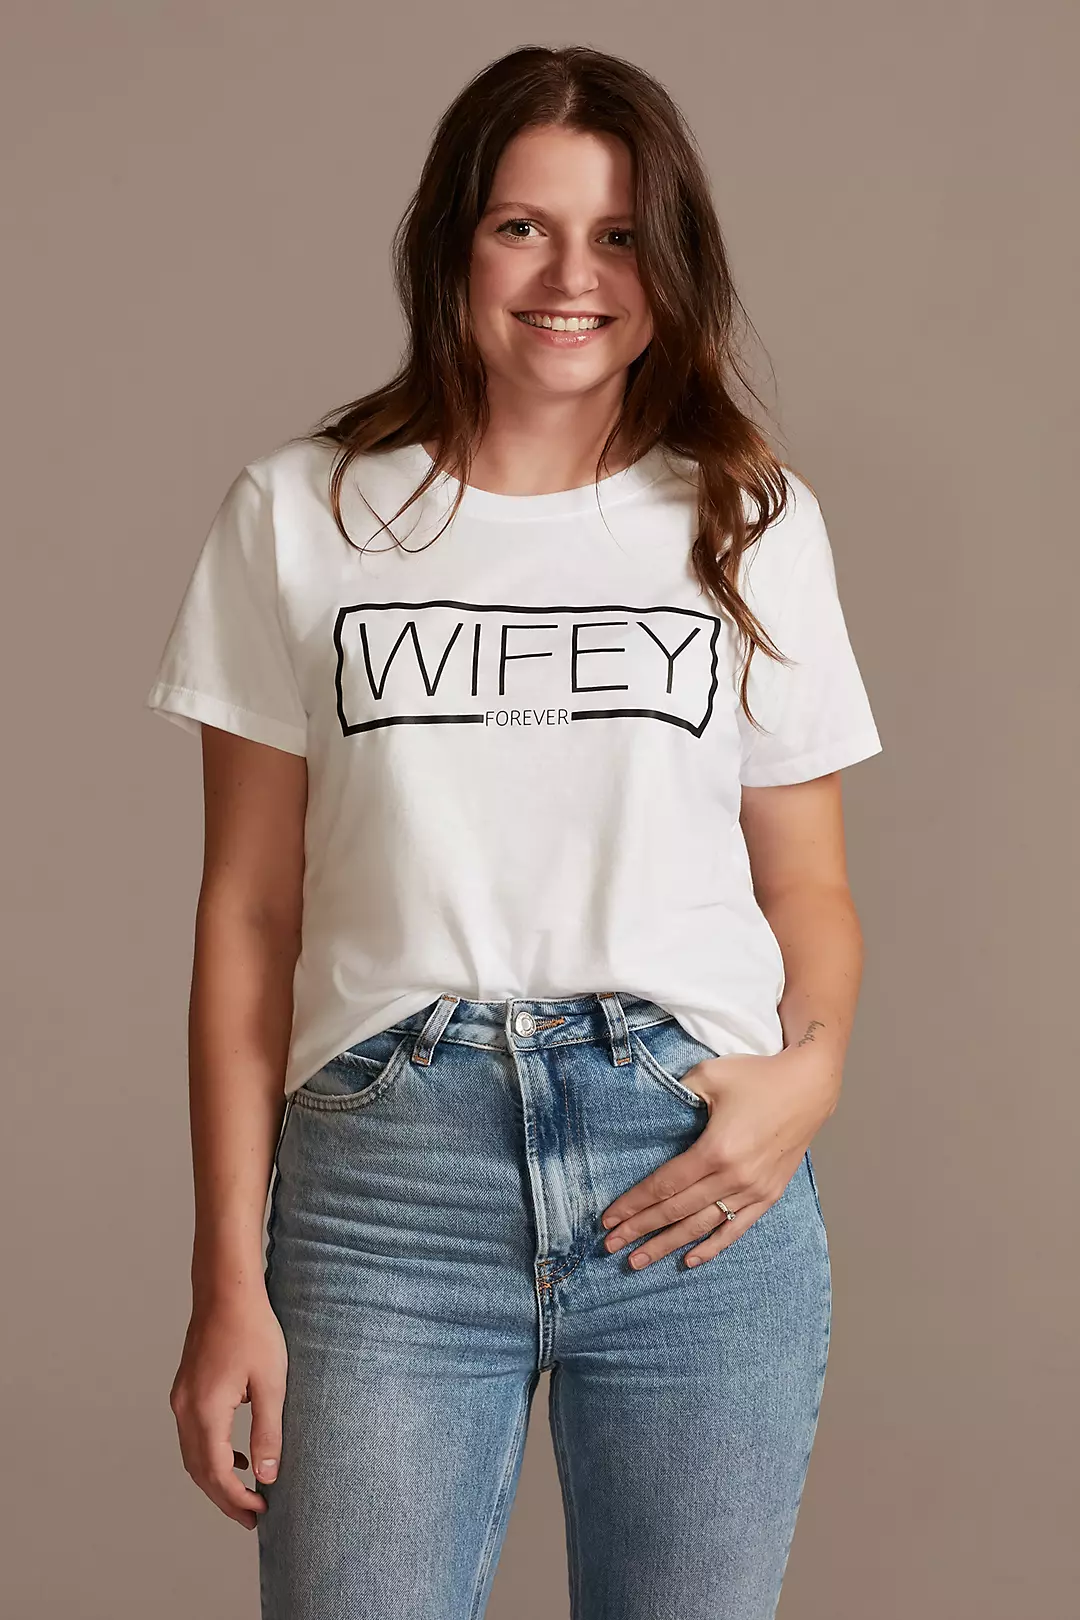 Wifey Forever T-Shirt Image